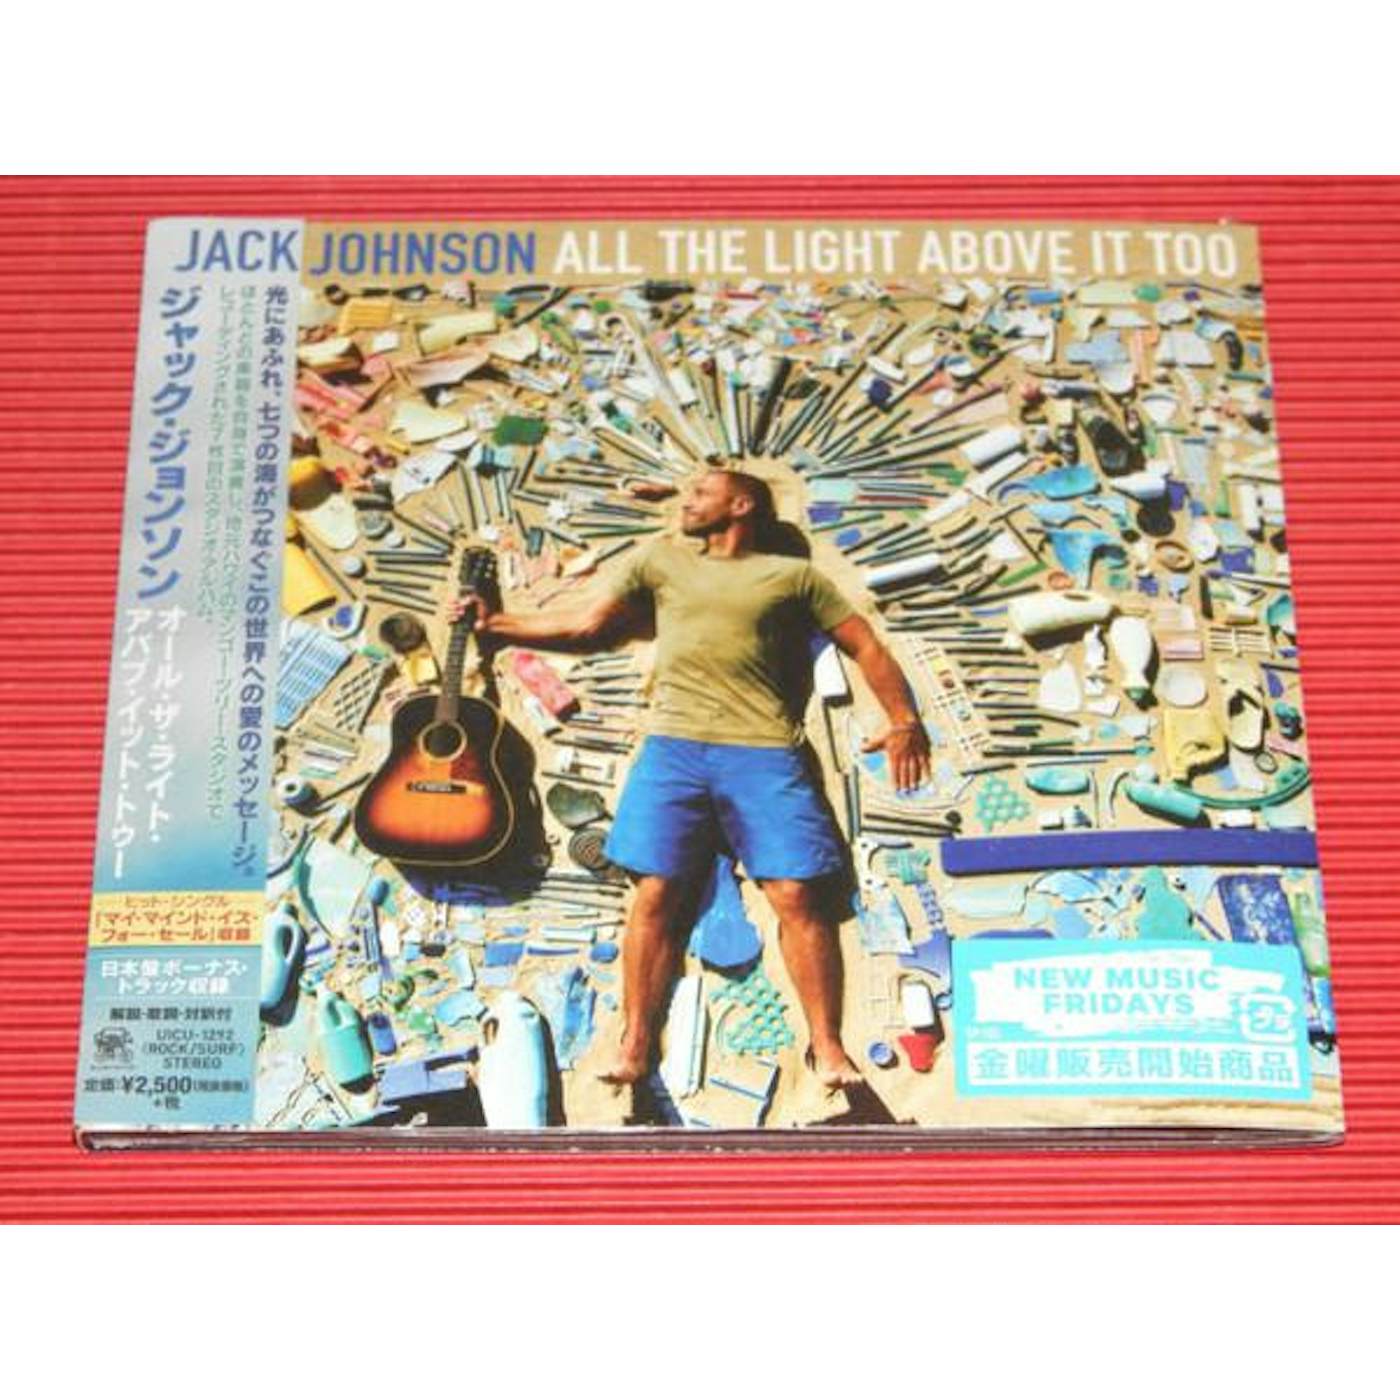 Jack Johnson ALL THE LIGHT ABOVE IT TOO CD